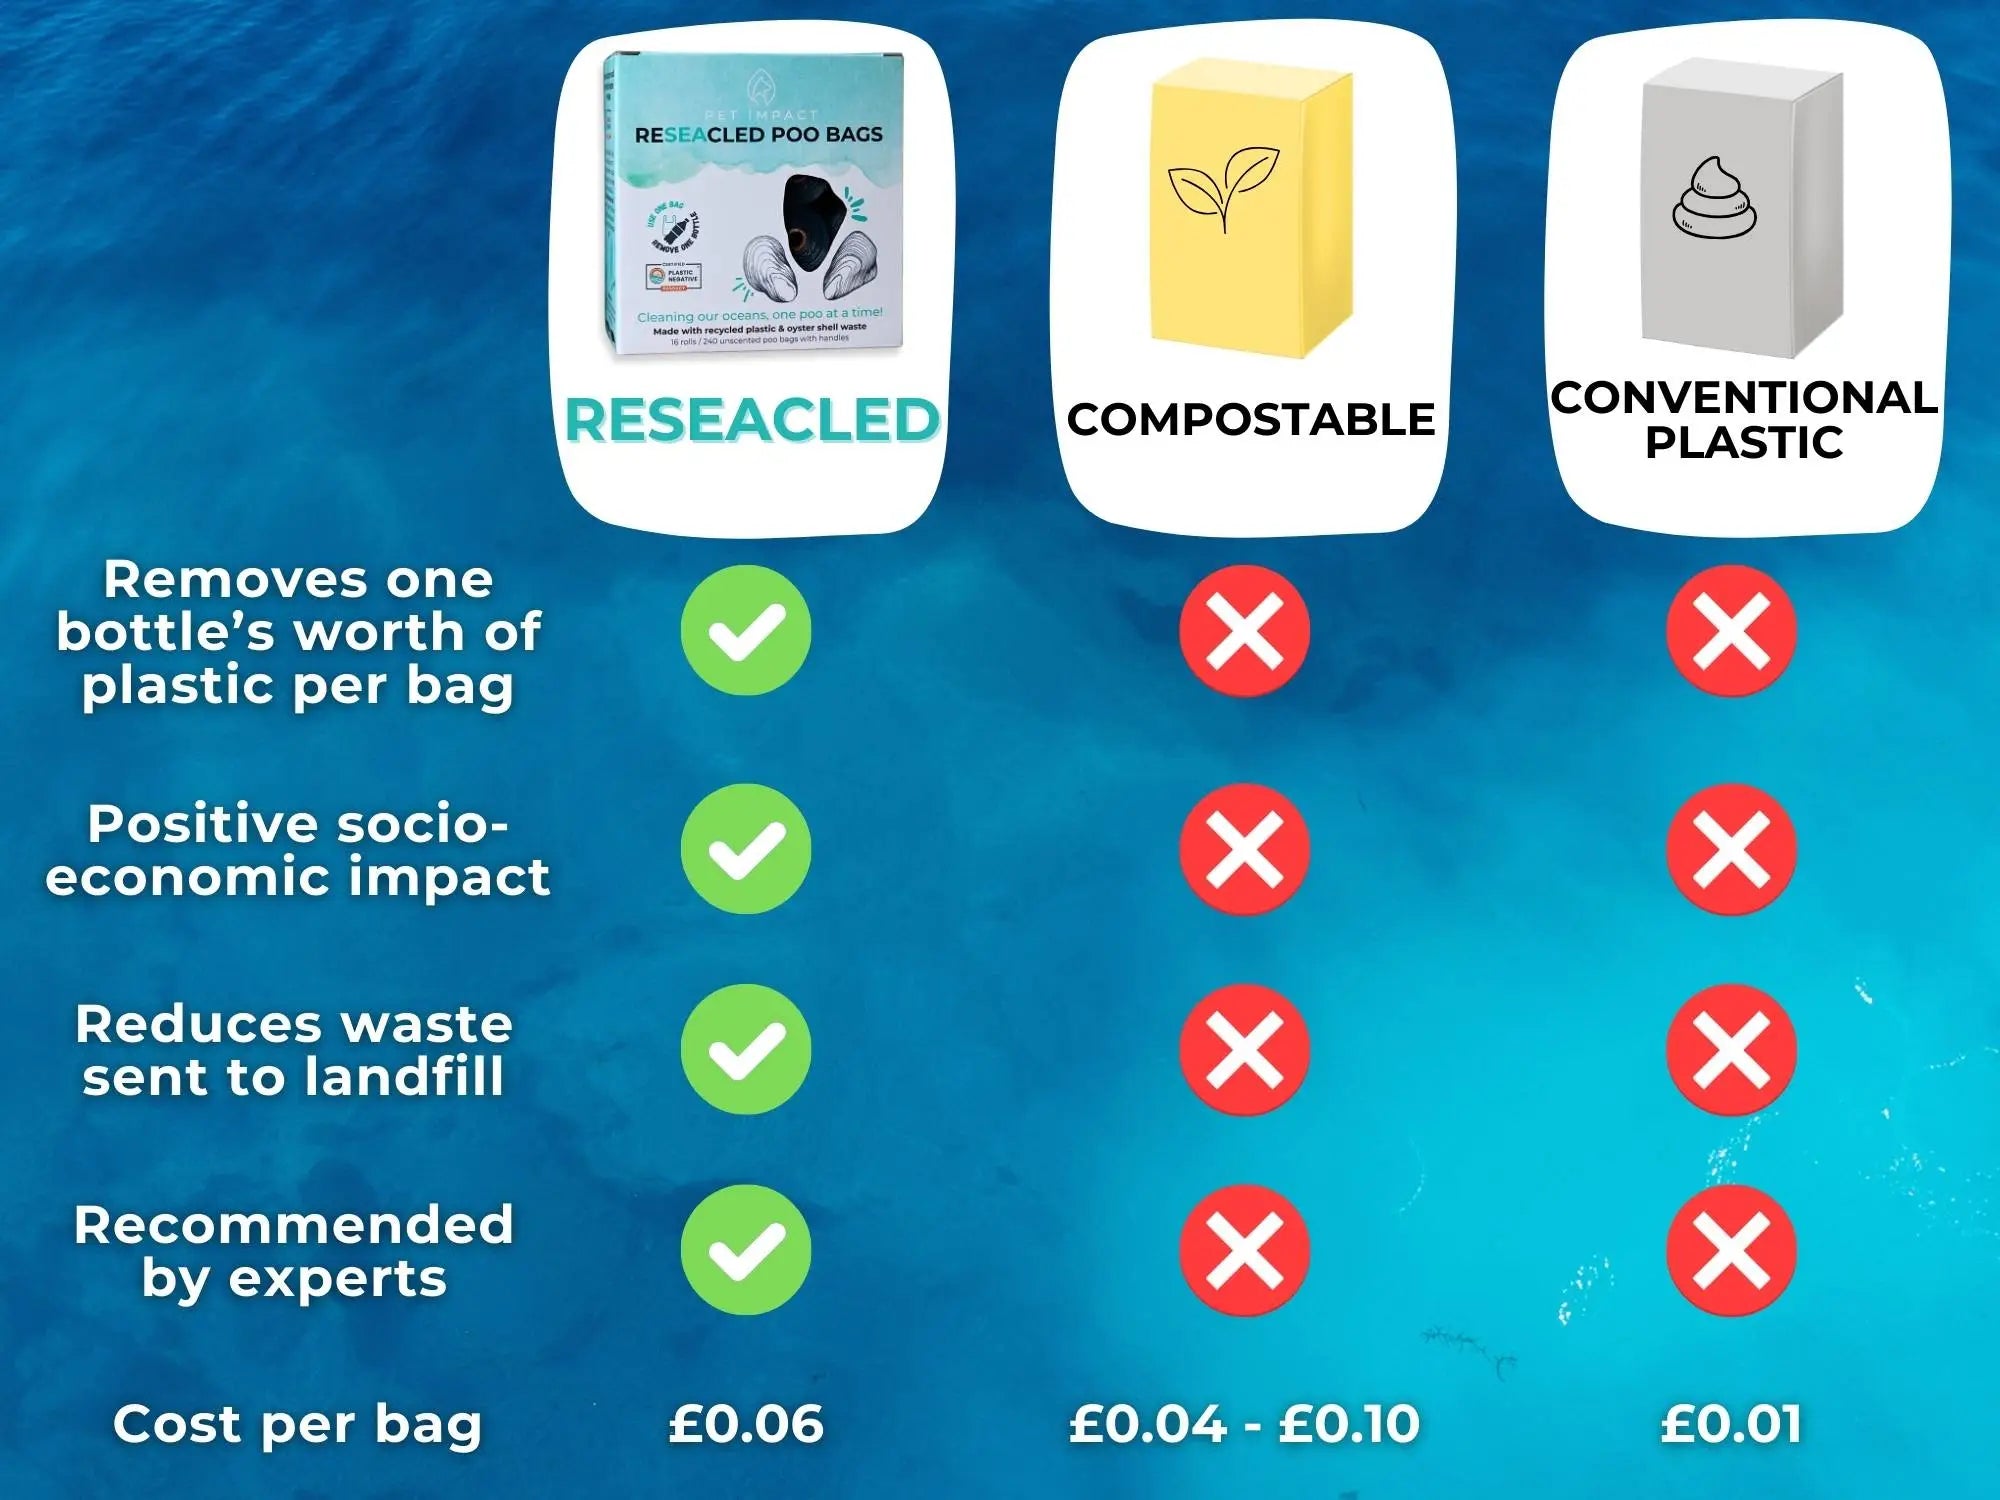 An infographic showing the price comparison of ReSEAcled poo bags